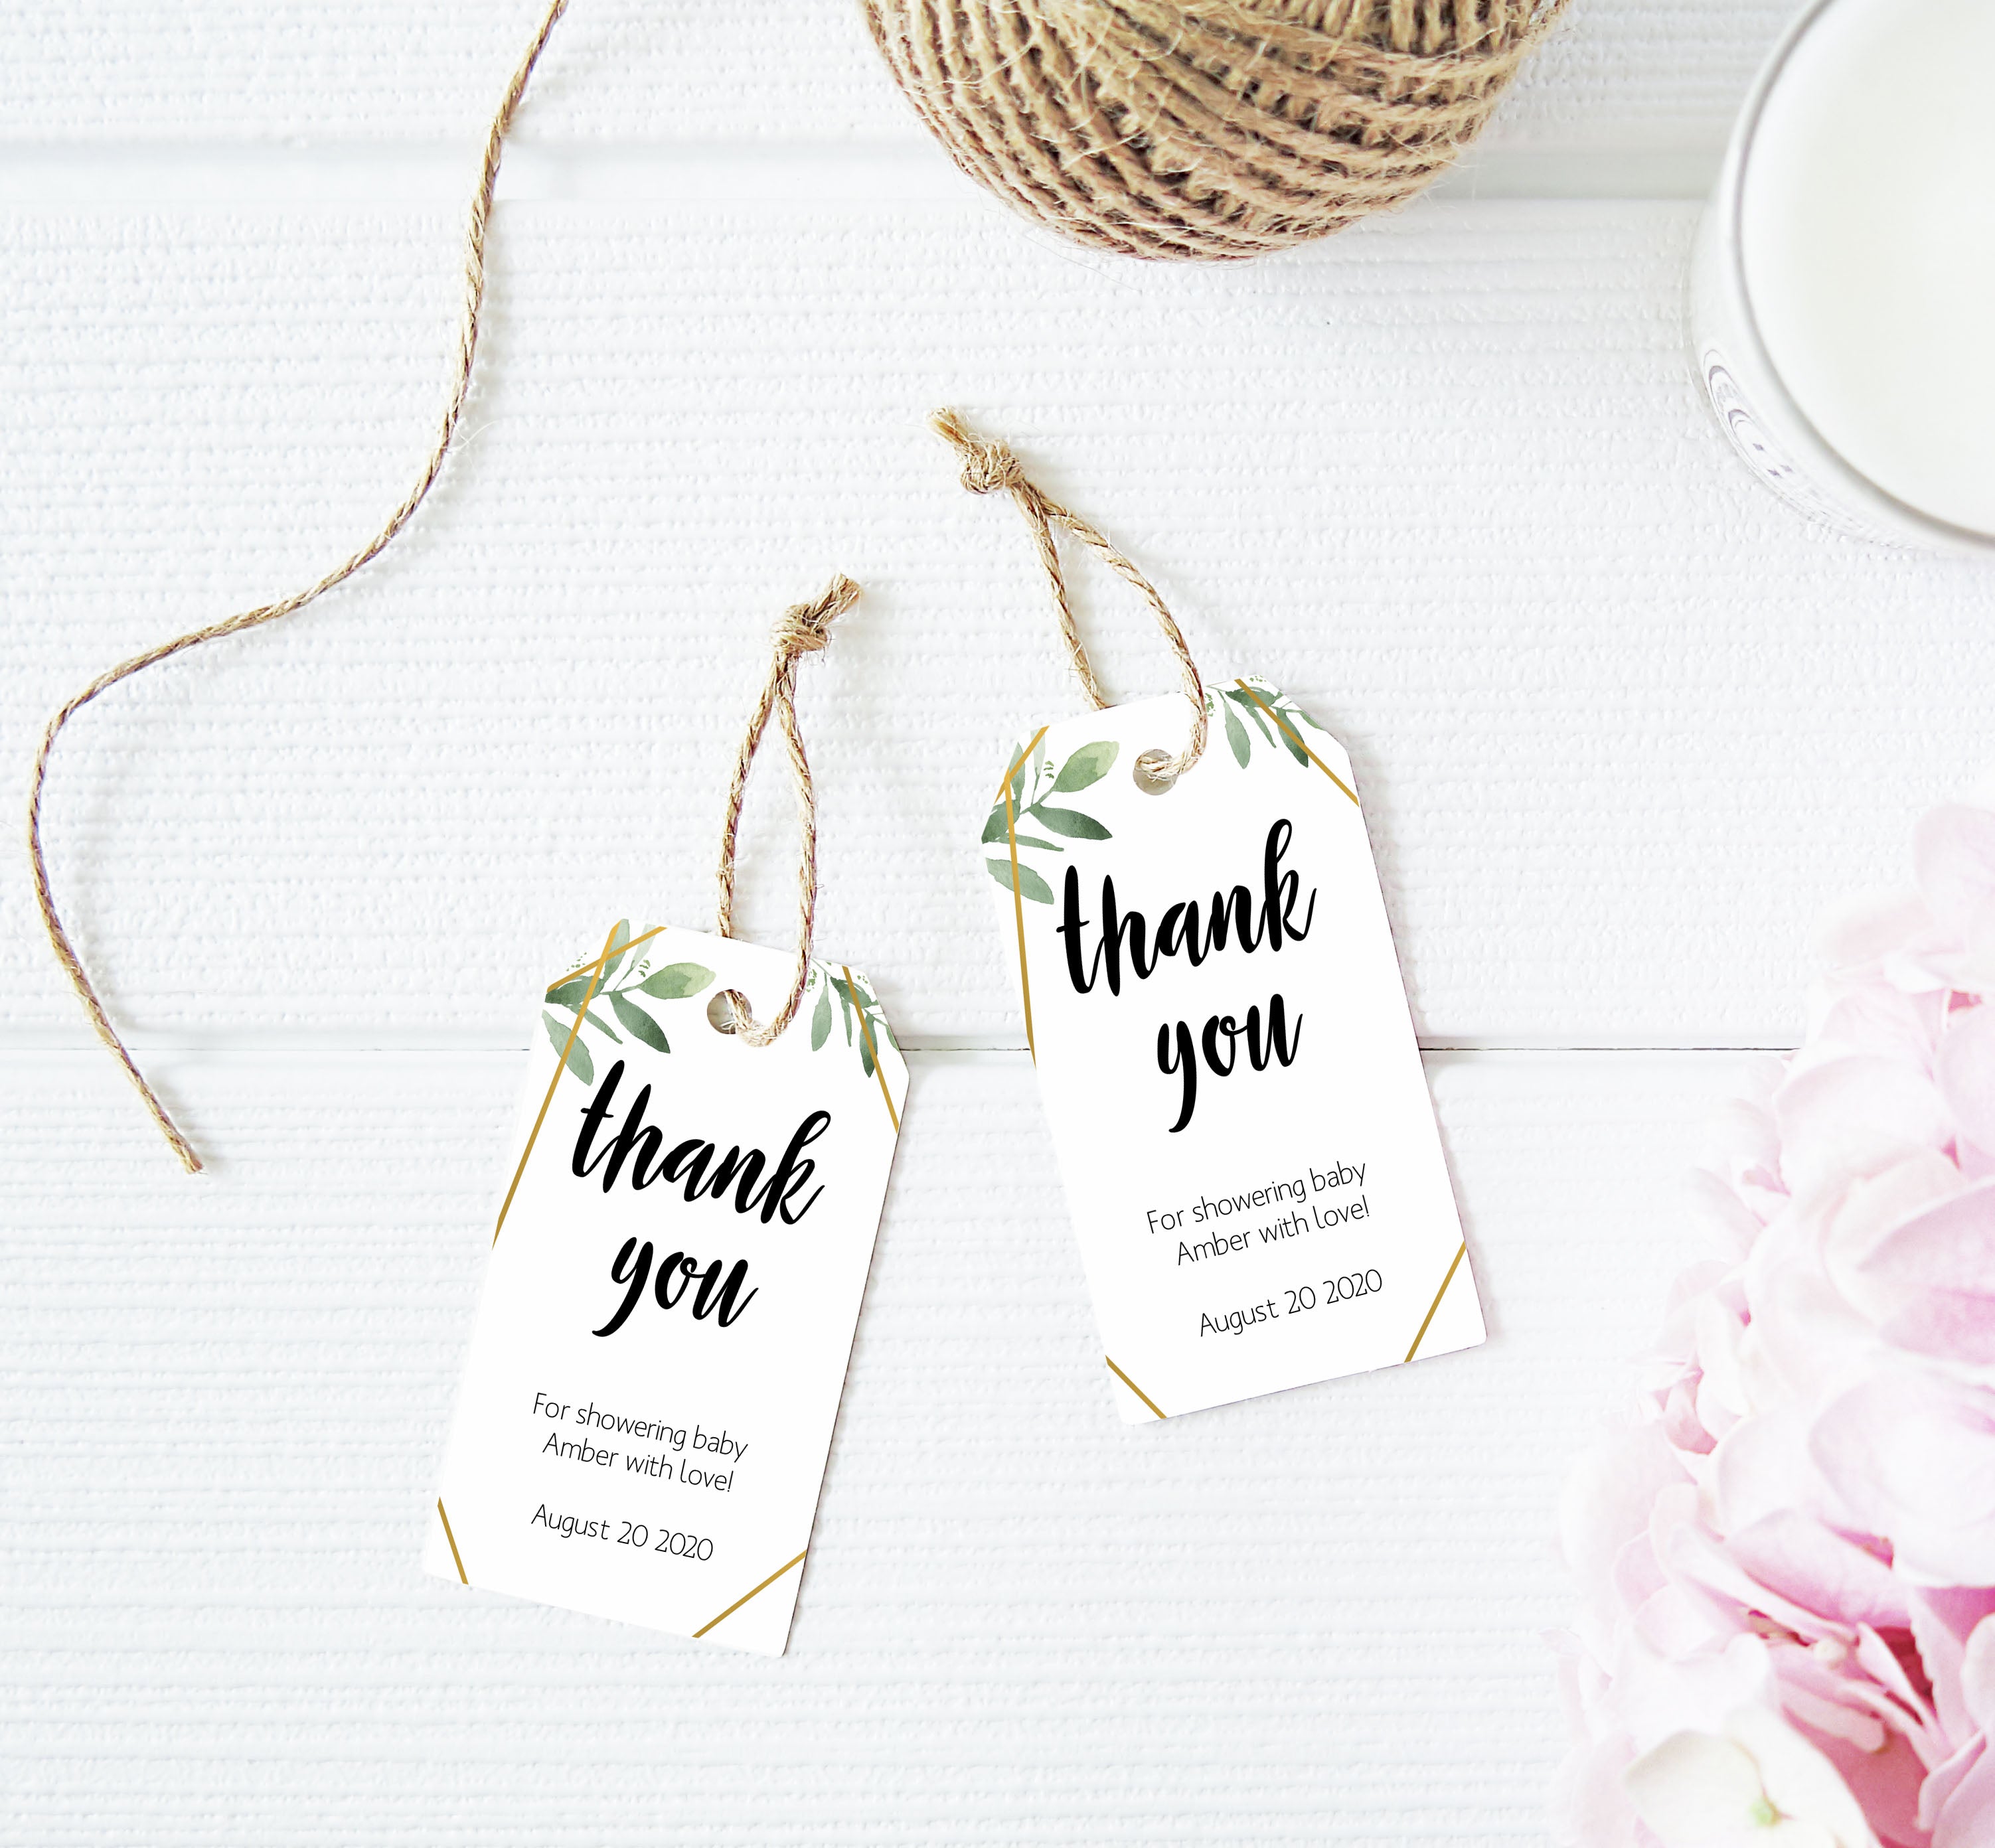 thank you baby tags, printable baby tags, editable baby thank you tags, gold geometric baby tags, greenery baby tags